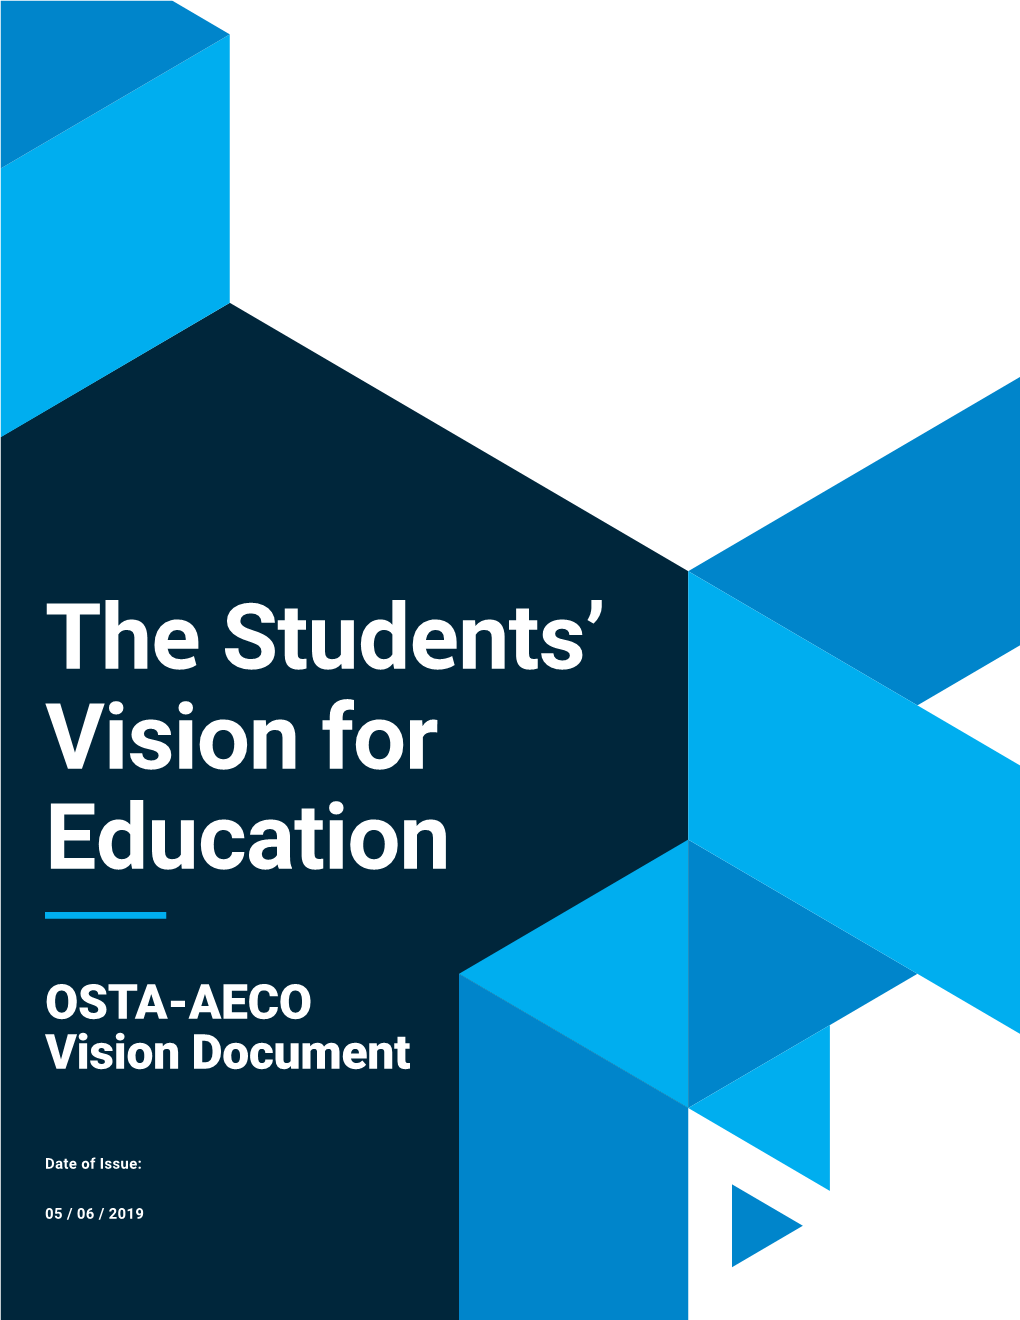 The Students' Vision for Education